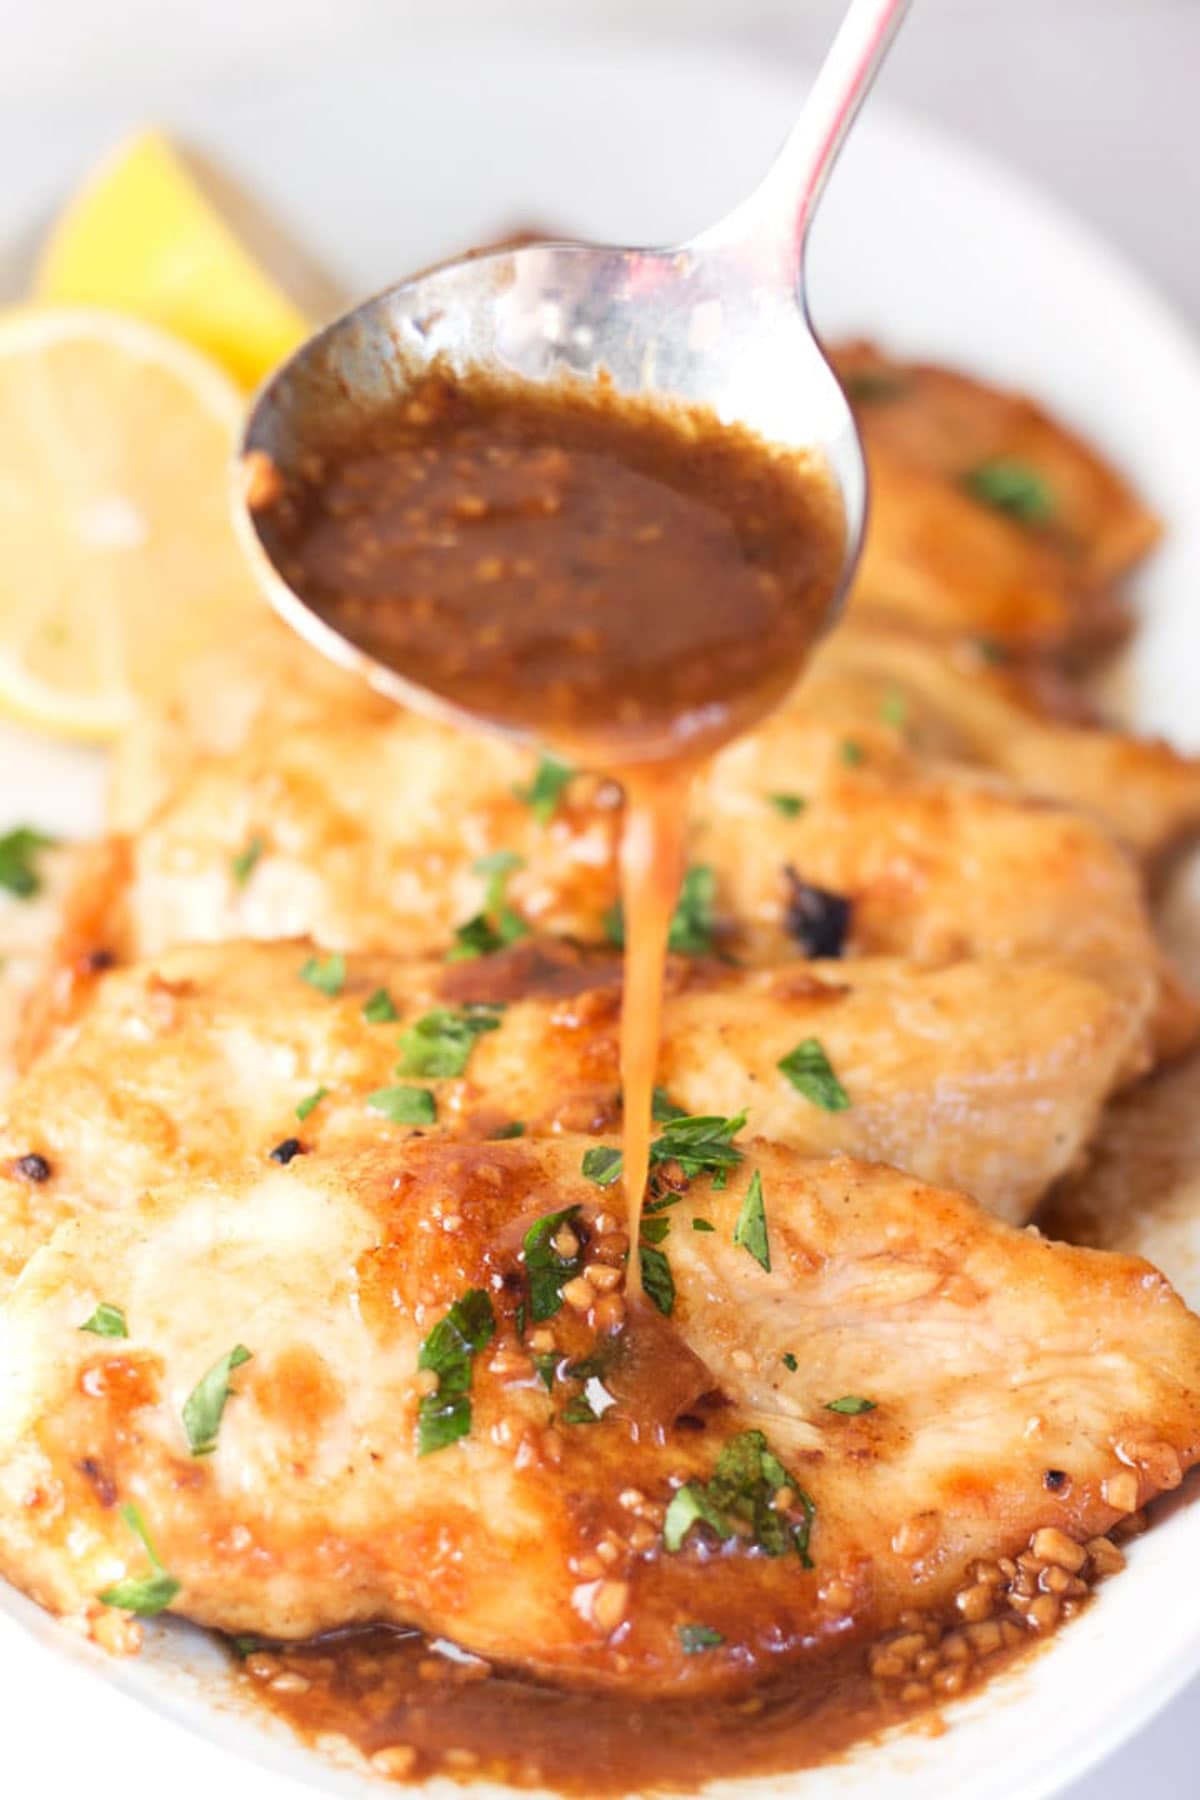 Ladle pouring garlic lemon sauce on a row of chicken breasts.